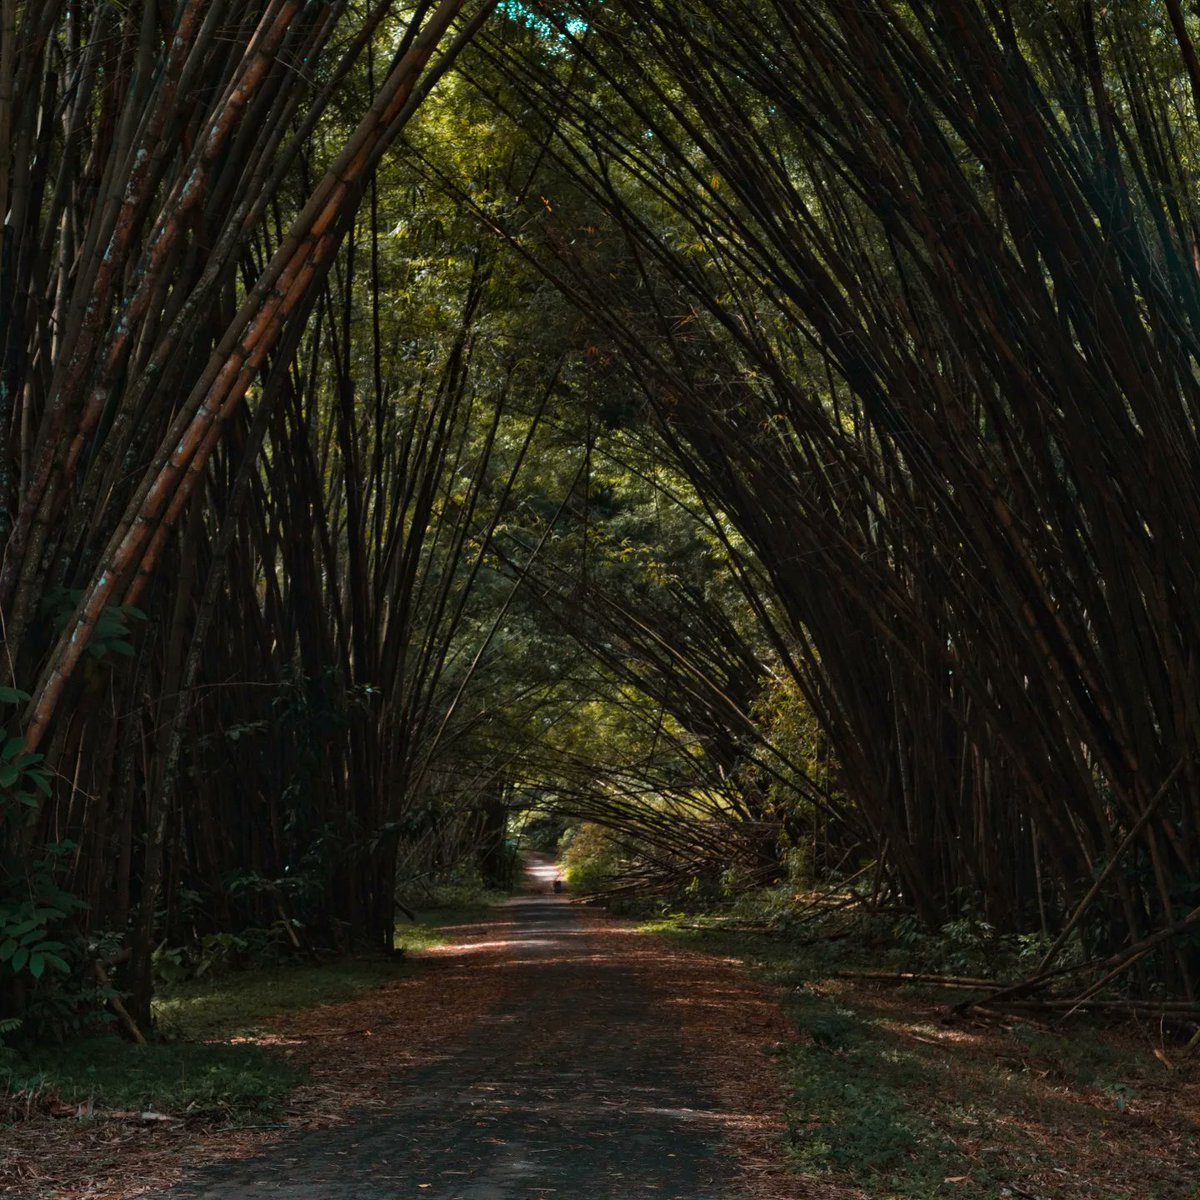 I got the chance to visit The Bamboo Cathedral in #Trinidad. What do you think? #CaribbeanTwitter #caribbeanphotography #fypシ #sonyA7Rii #nikonlens #50mm #picoftheday #Photo_Folio #Trinipics #grenadaphtographer